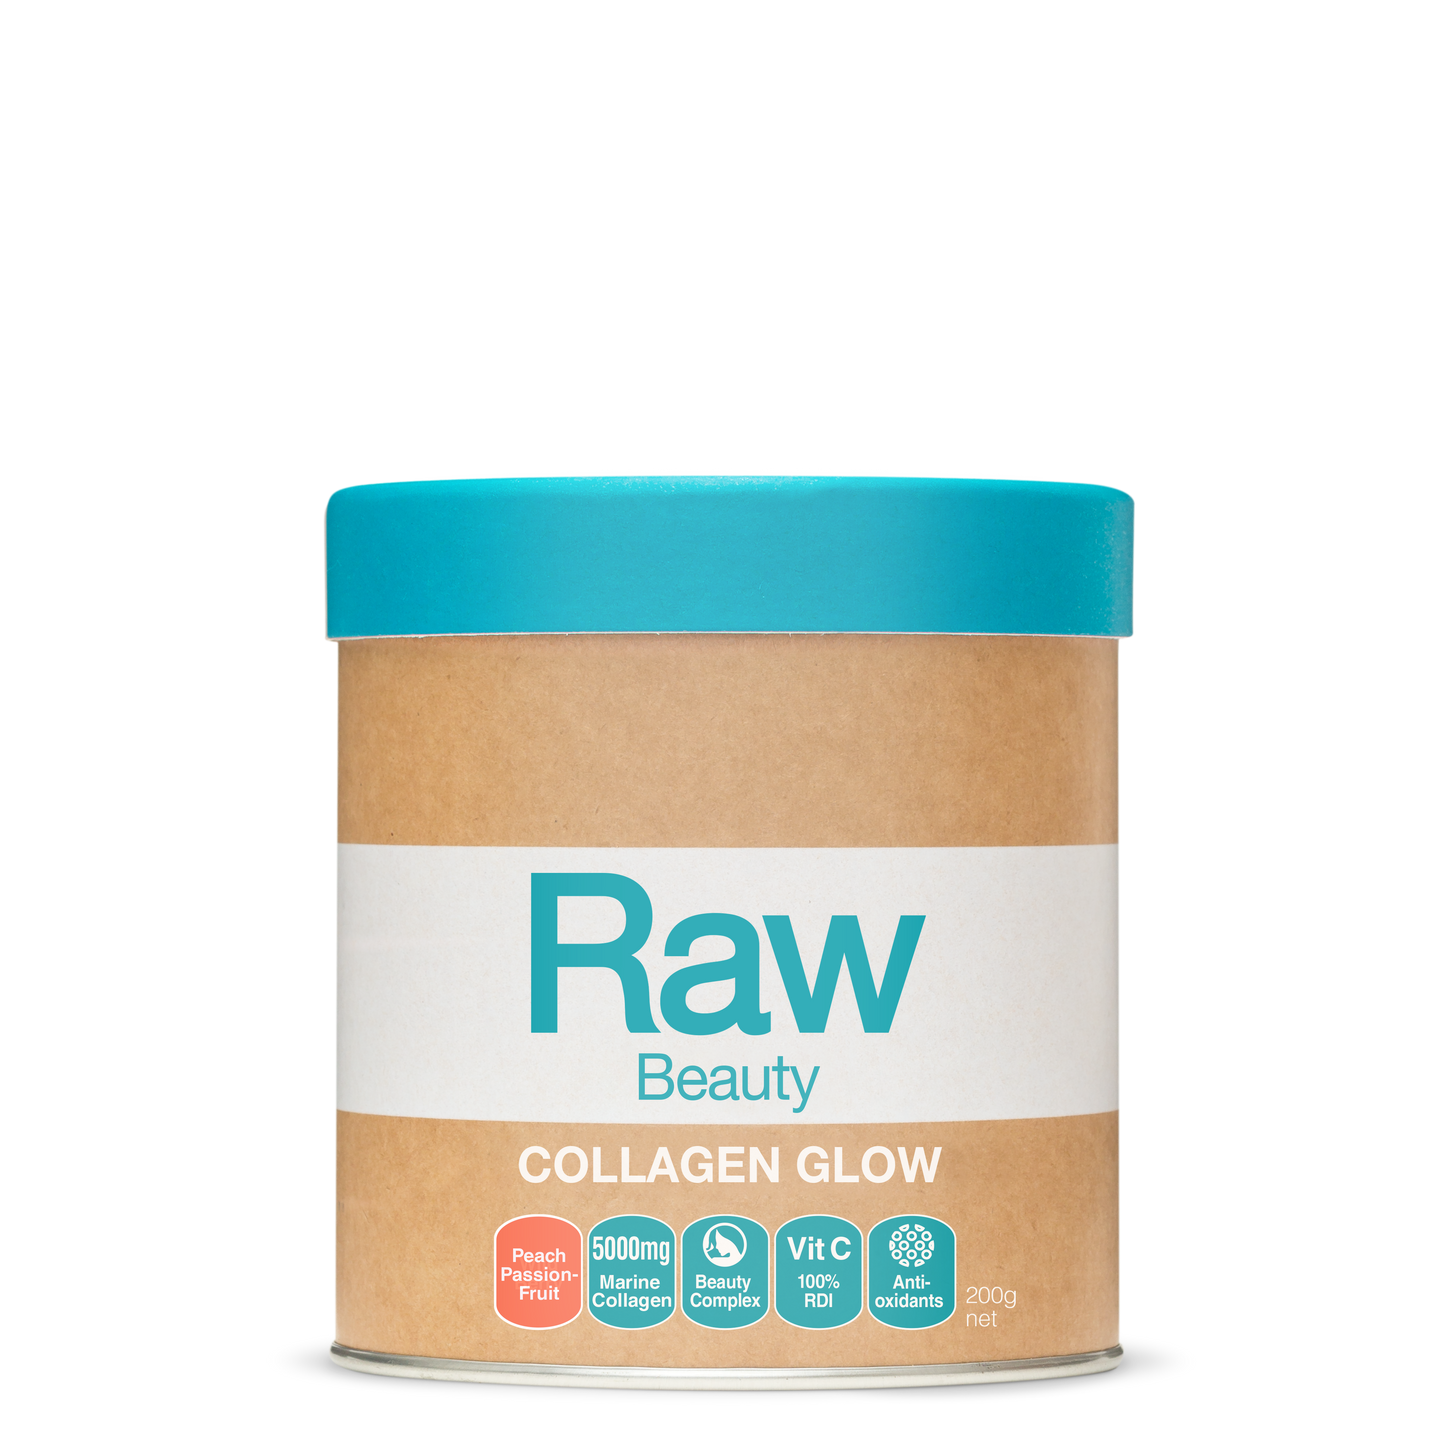 Amazonia Raw Beauty Collagen Glow 200g, Peach Passionfruit Flavour